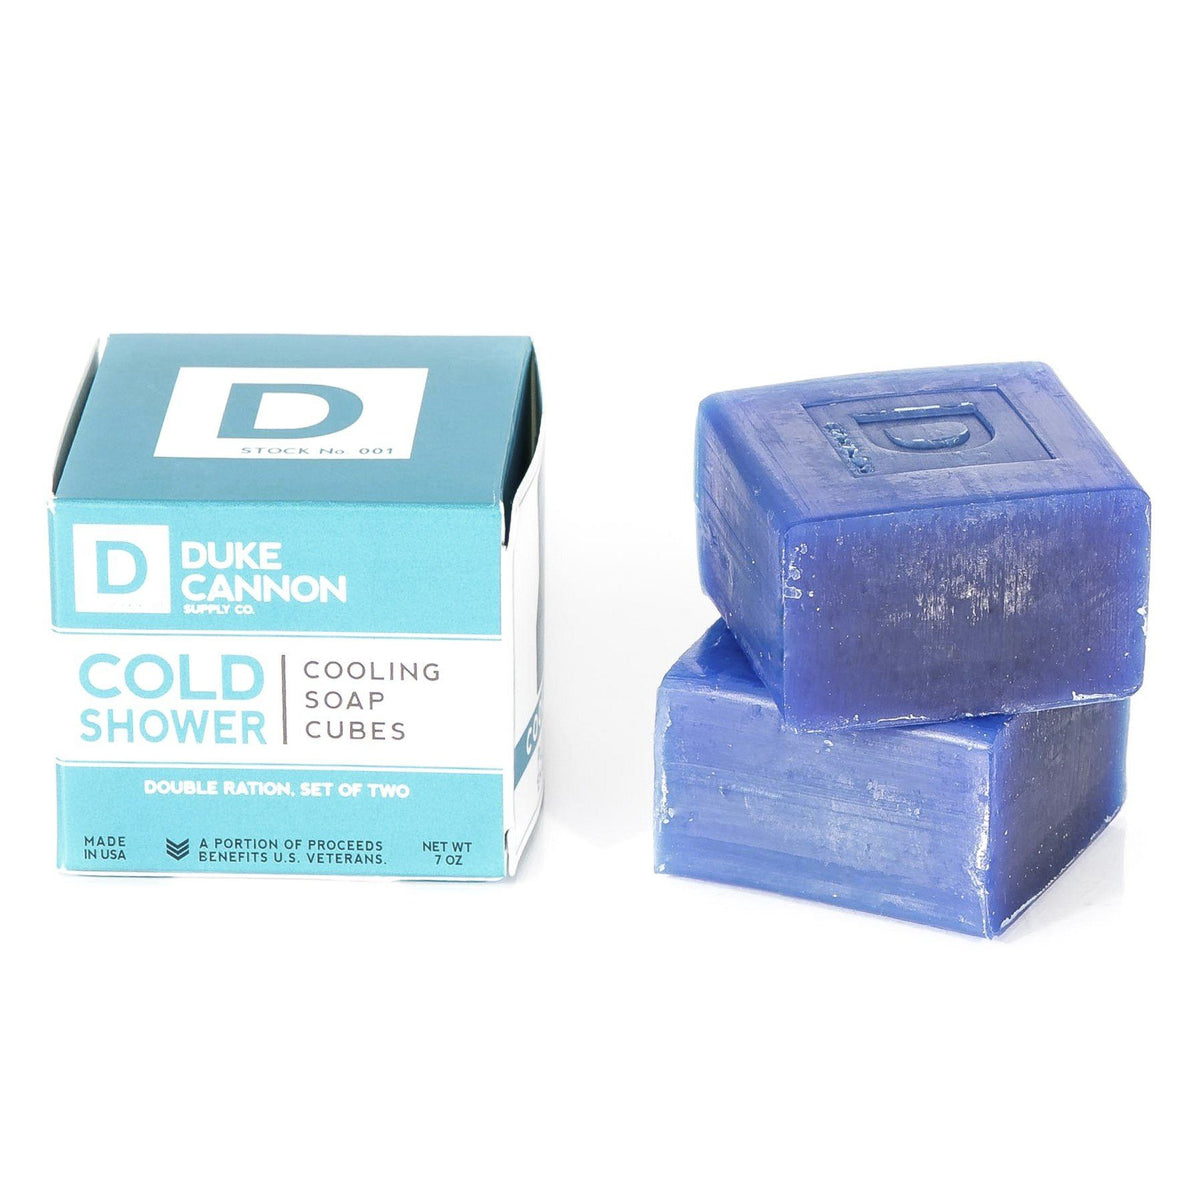 https://www.shopfendrihan.shop/wp-content/uploads/1691/38/be-inspired-and-look-through-our-duke-cannon-supply-co-cold-shower-cooling-soap-cubes-discontinued-collection-buy-now_0.jpg